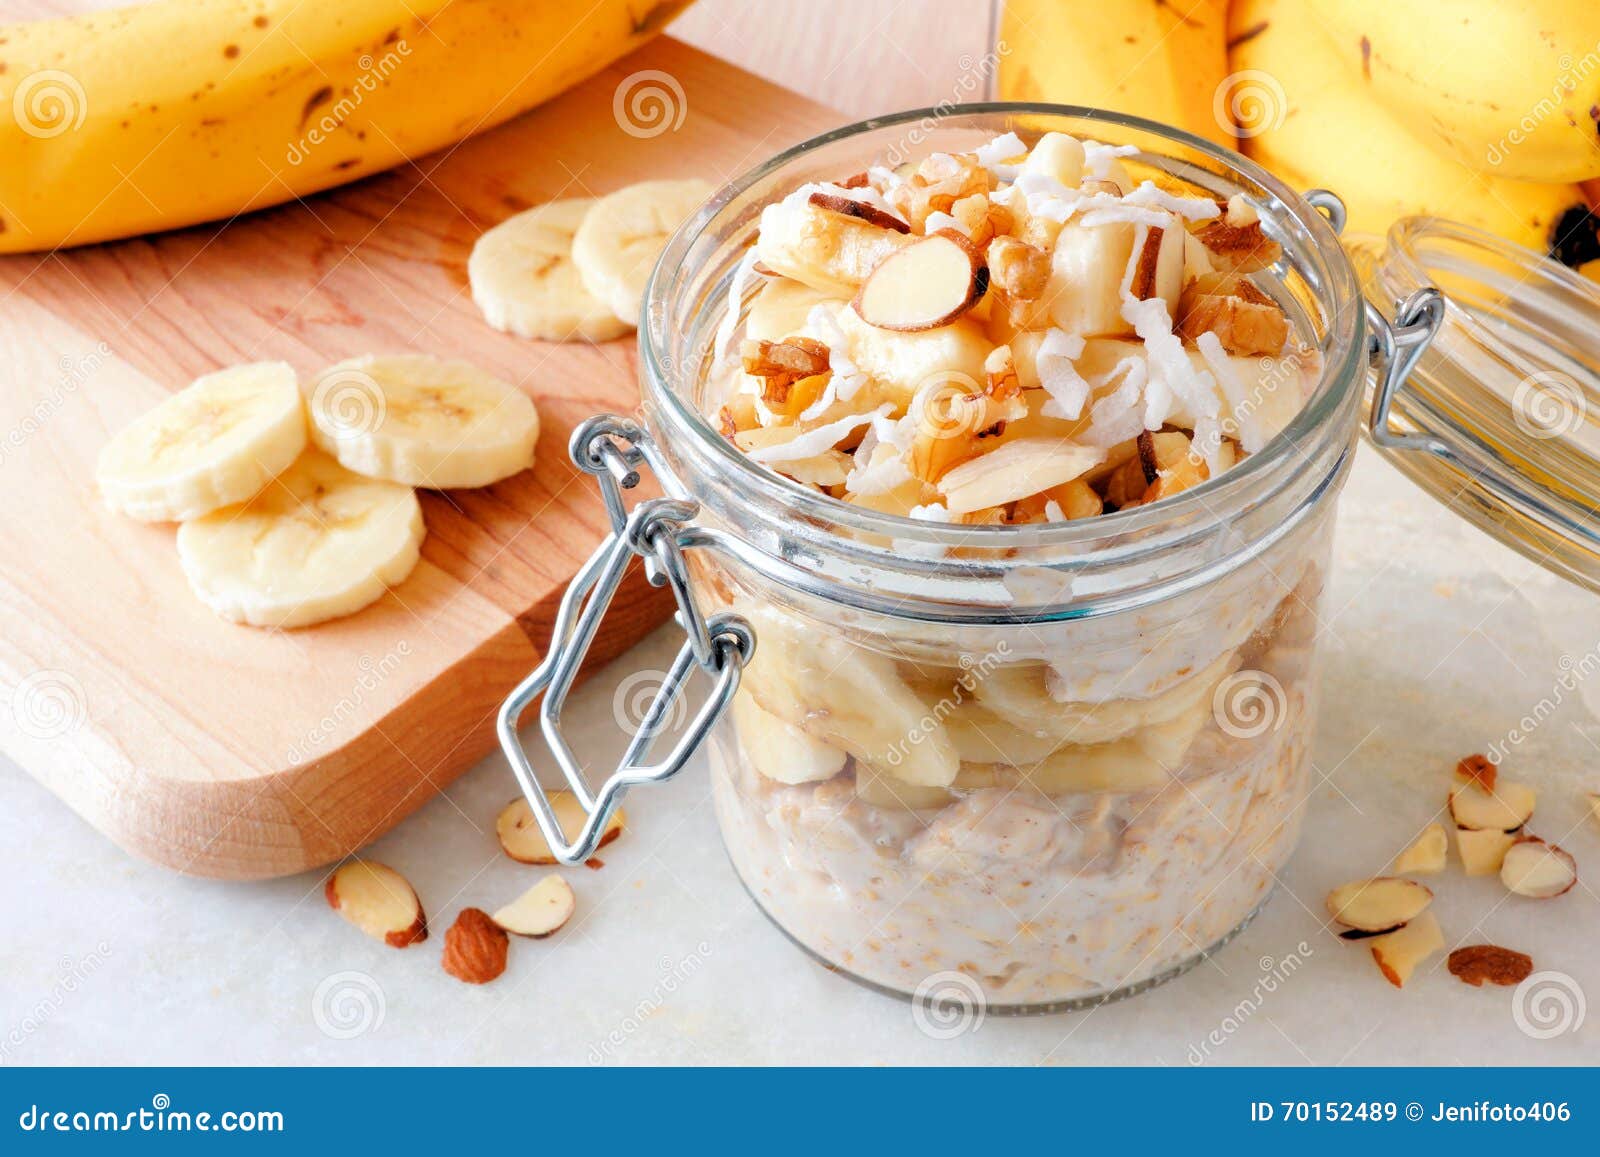 overnight oats with bananas and nuts on white marble